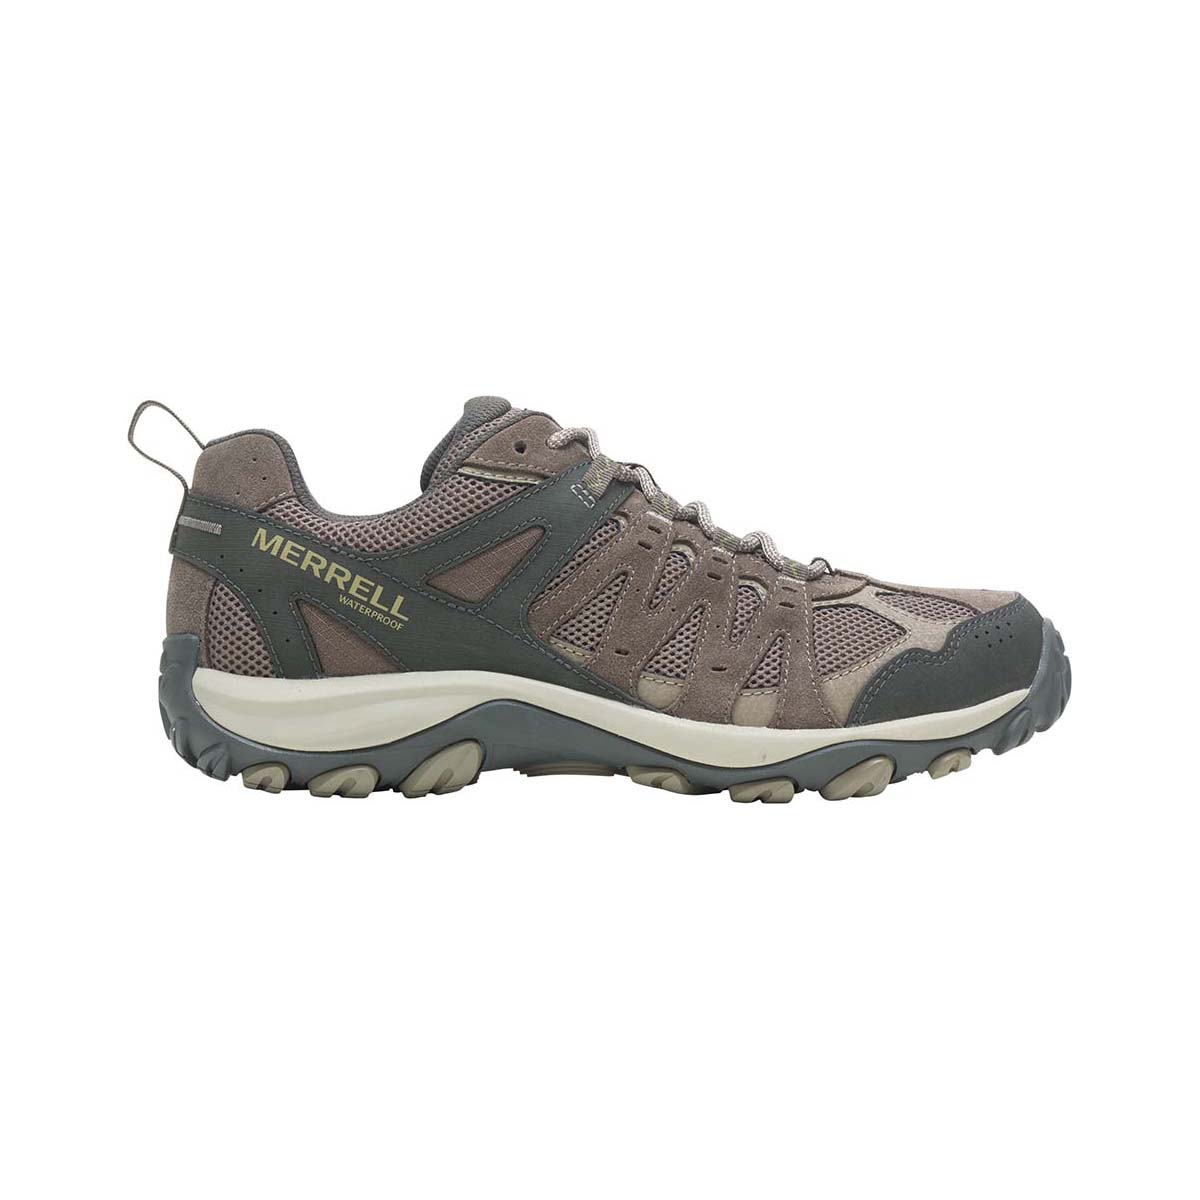 Merrell Accentor 3 Men's Low WP Hiking Boots Boulder 8